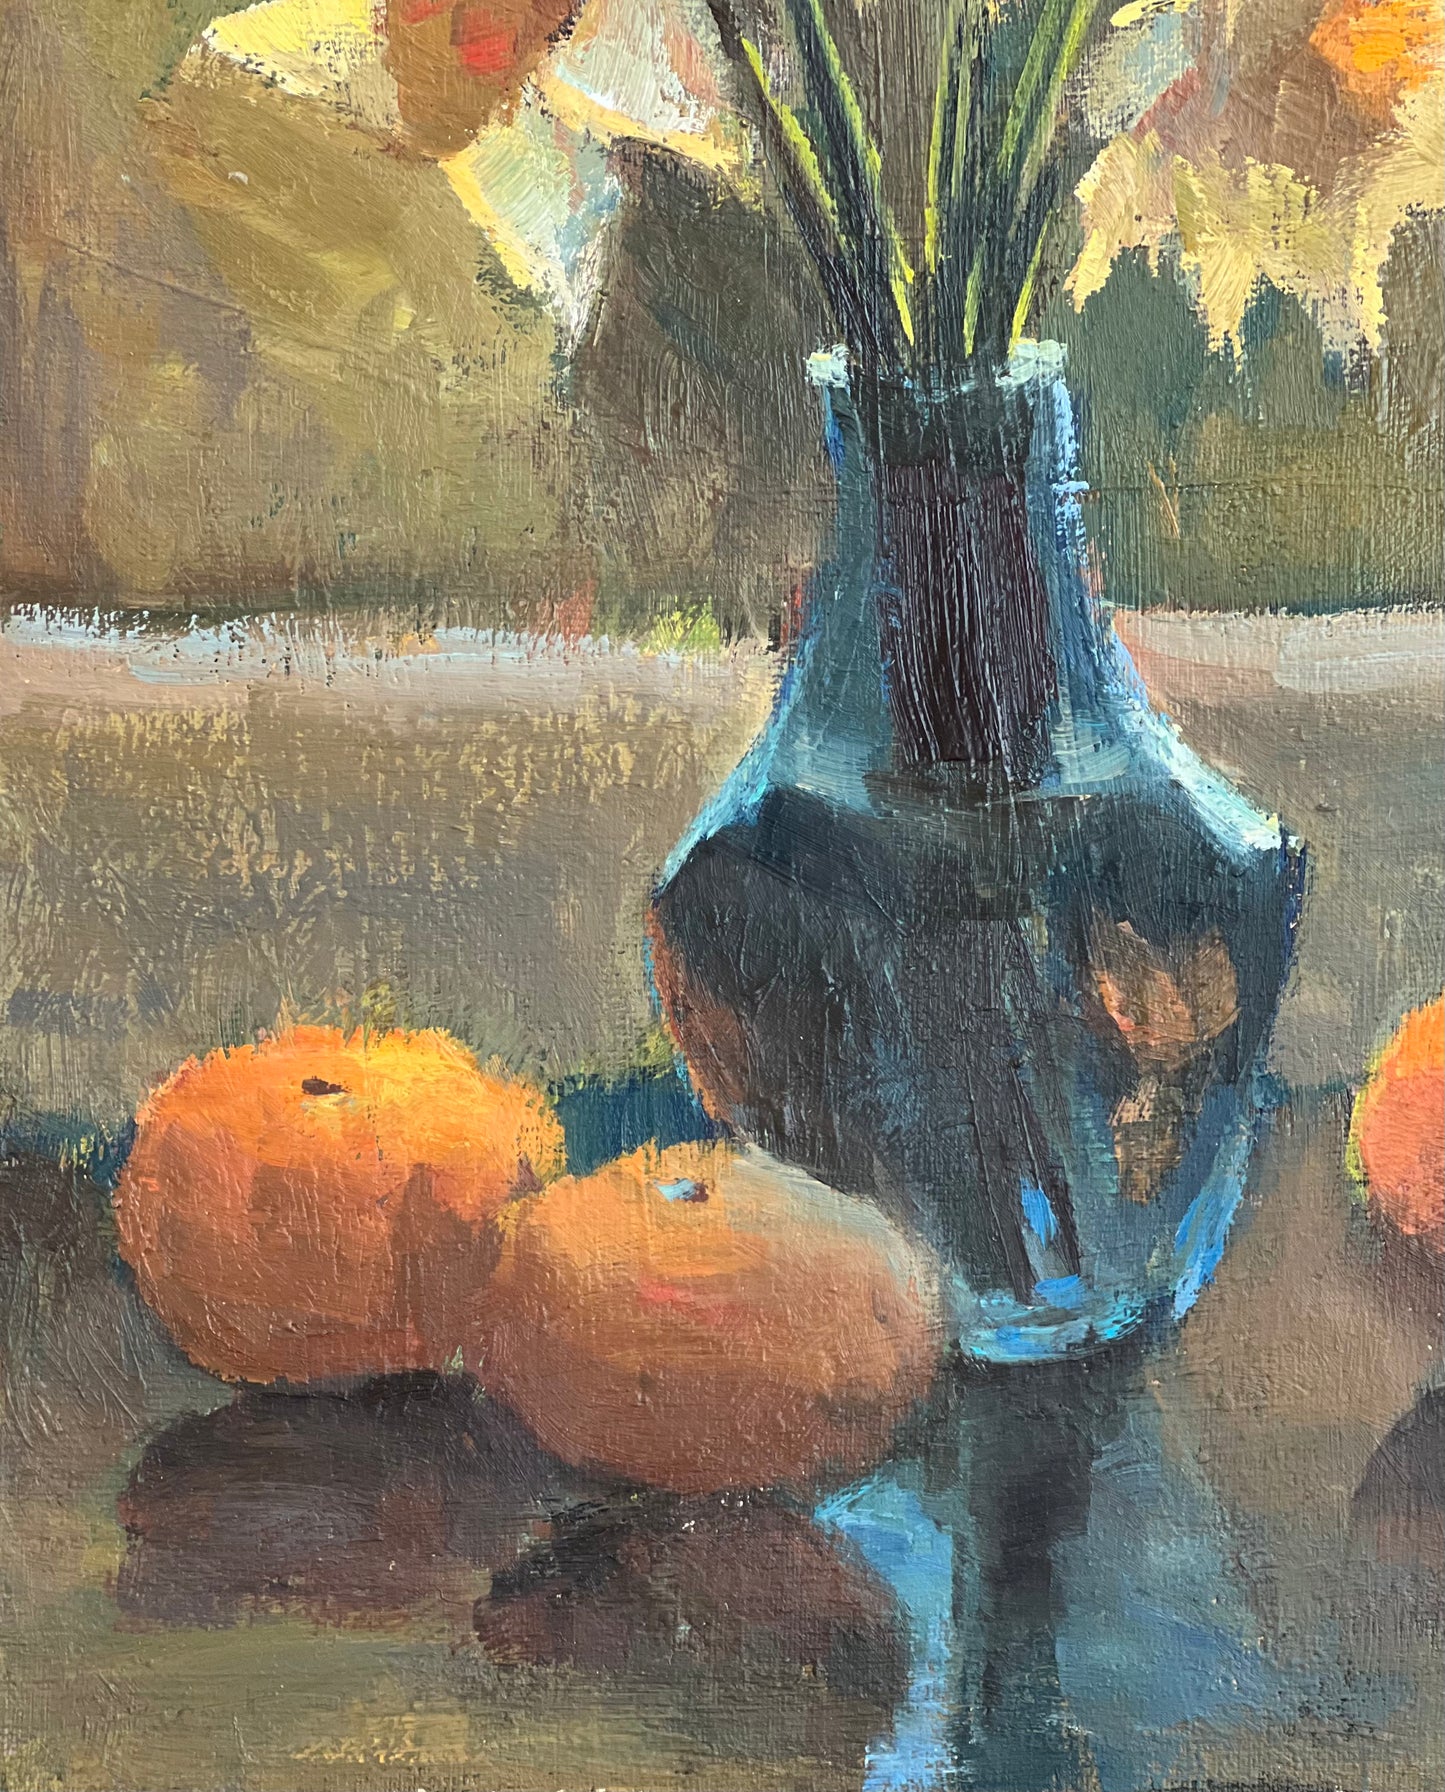 Still Life Oil Painting - Backlit Daffodils and Oranges